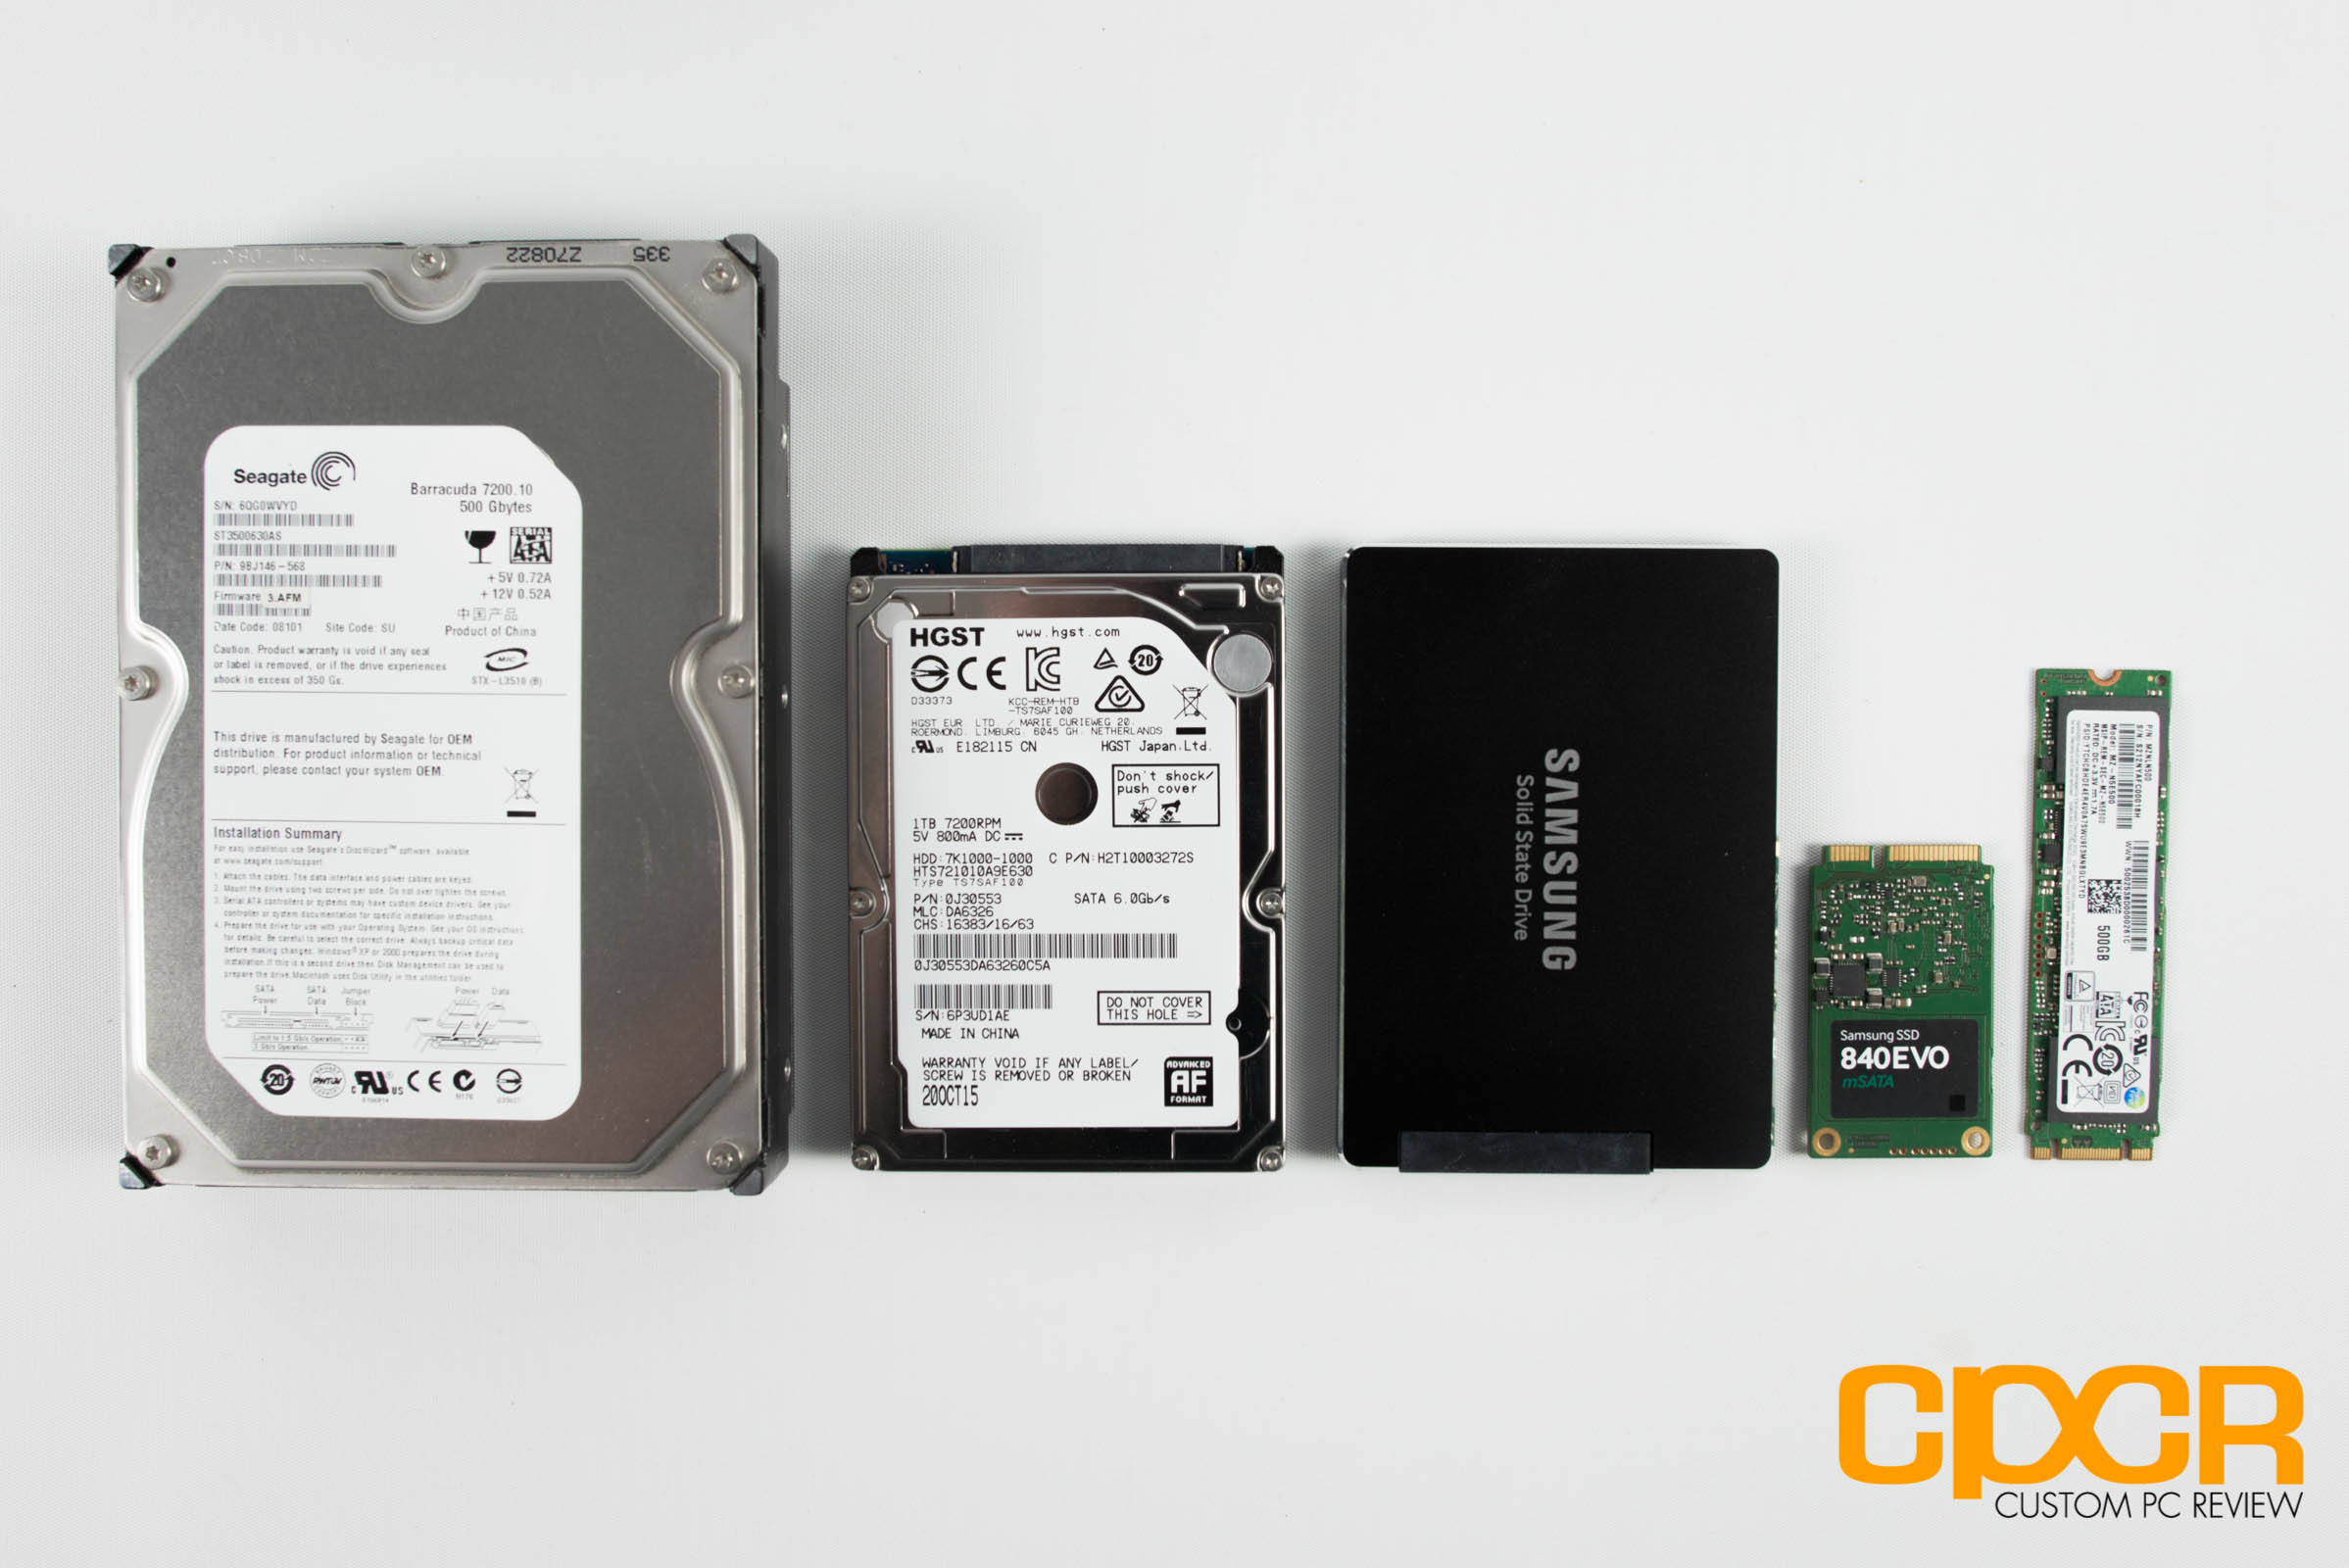 Skinnende mini filthy SSD vs HDD Pros and Cons Comparison | Custom PC Review